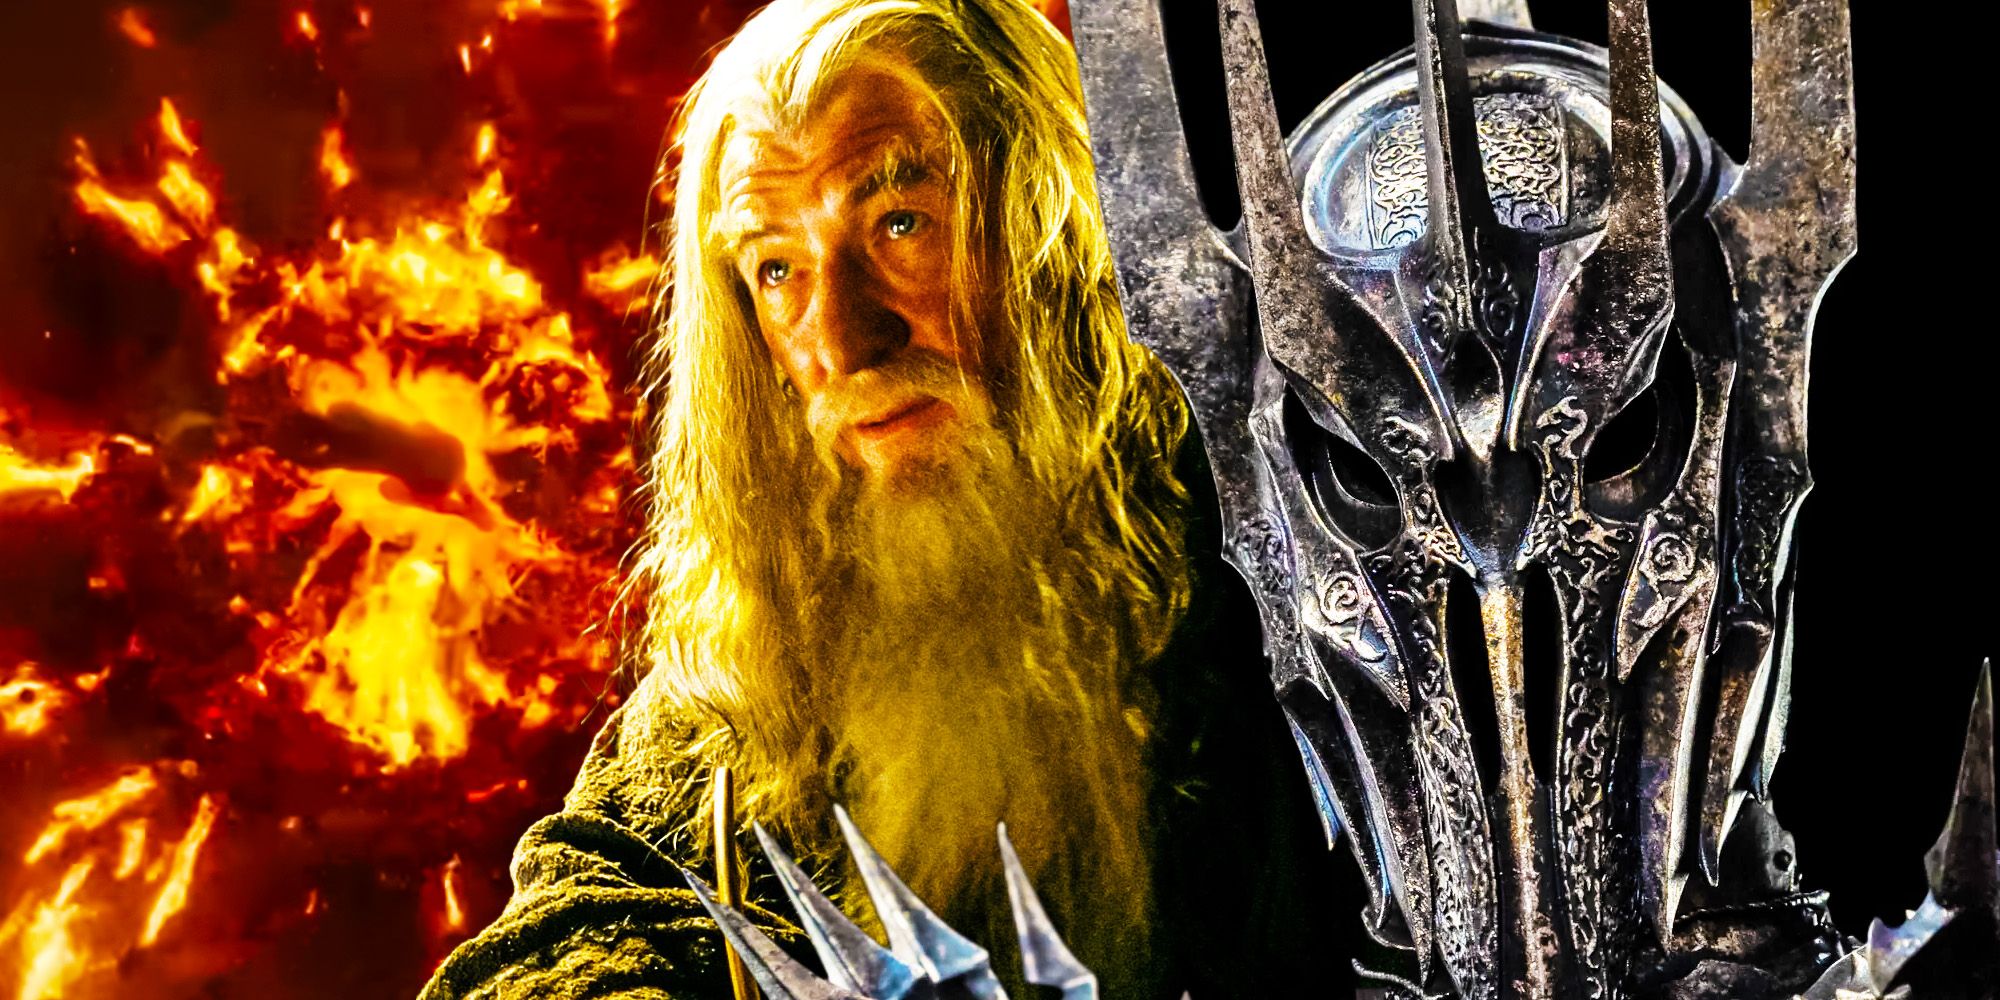 Lord of the Rings: The Rings of Power: Sauron Arrives in Full Trailer —  Watch